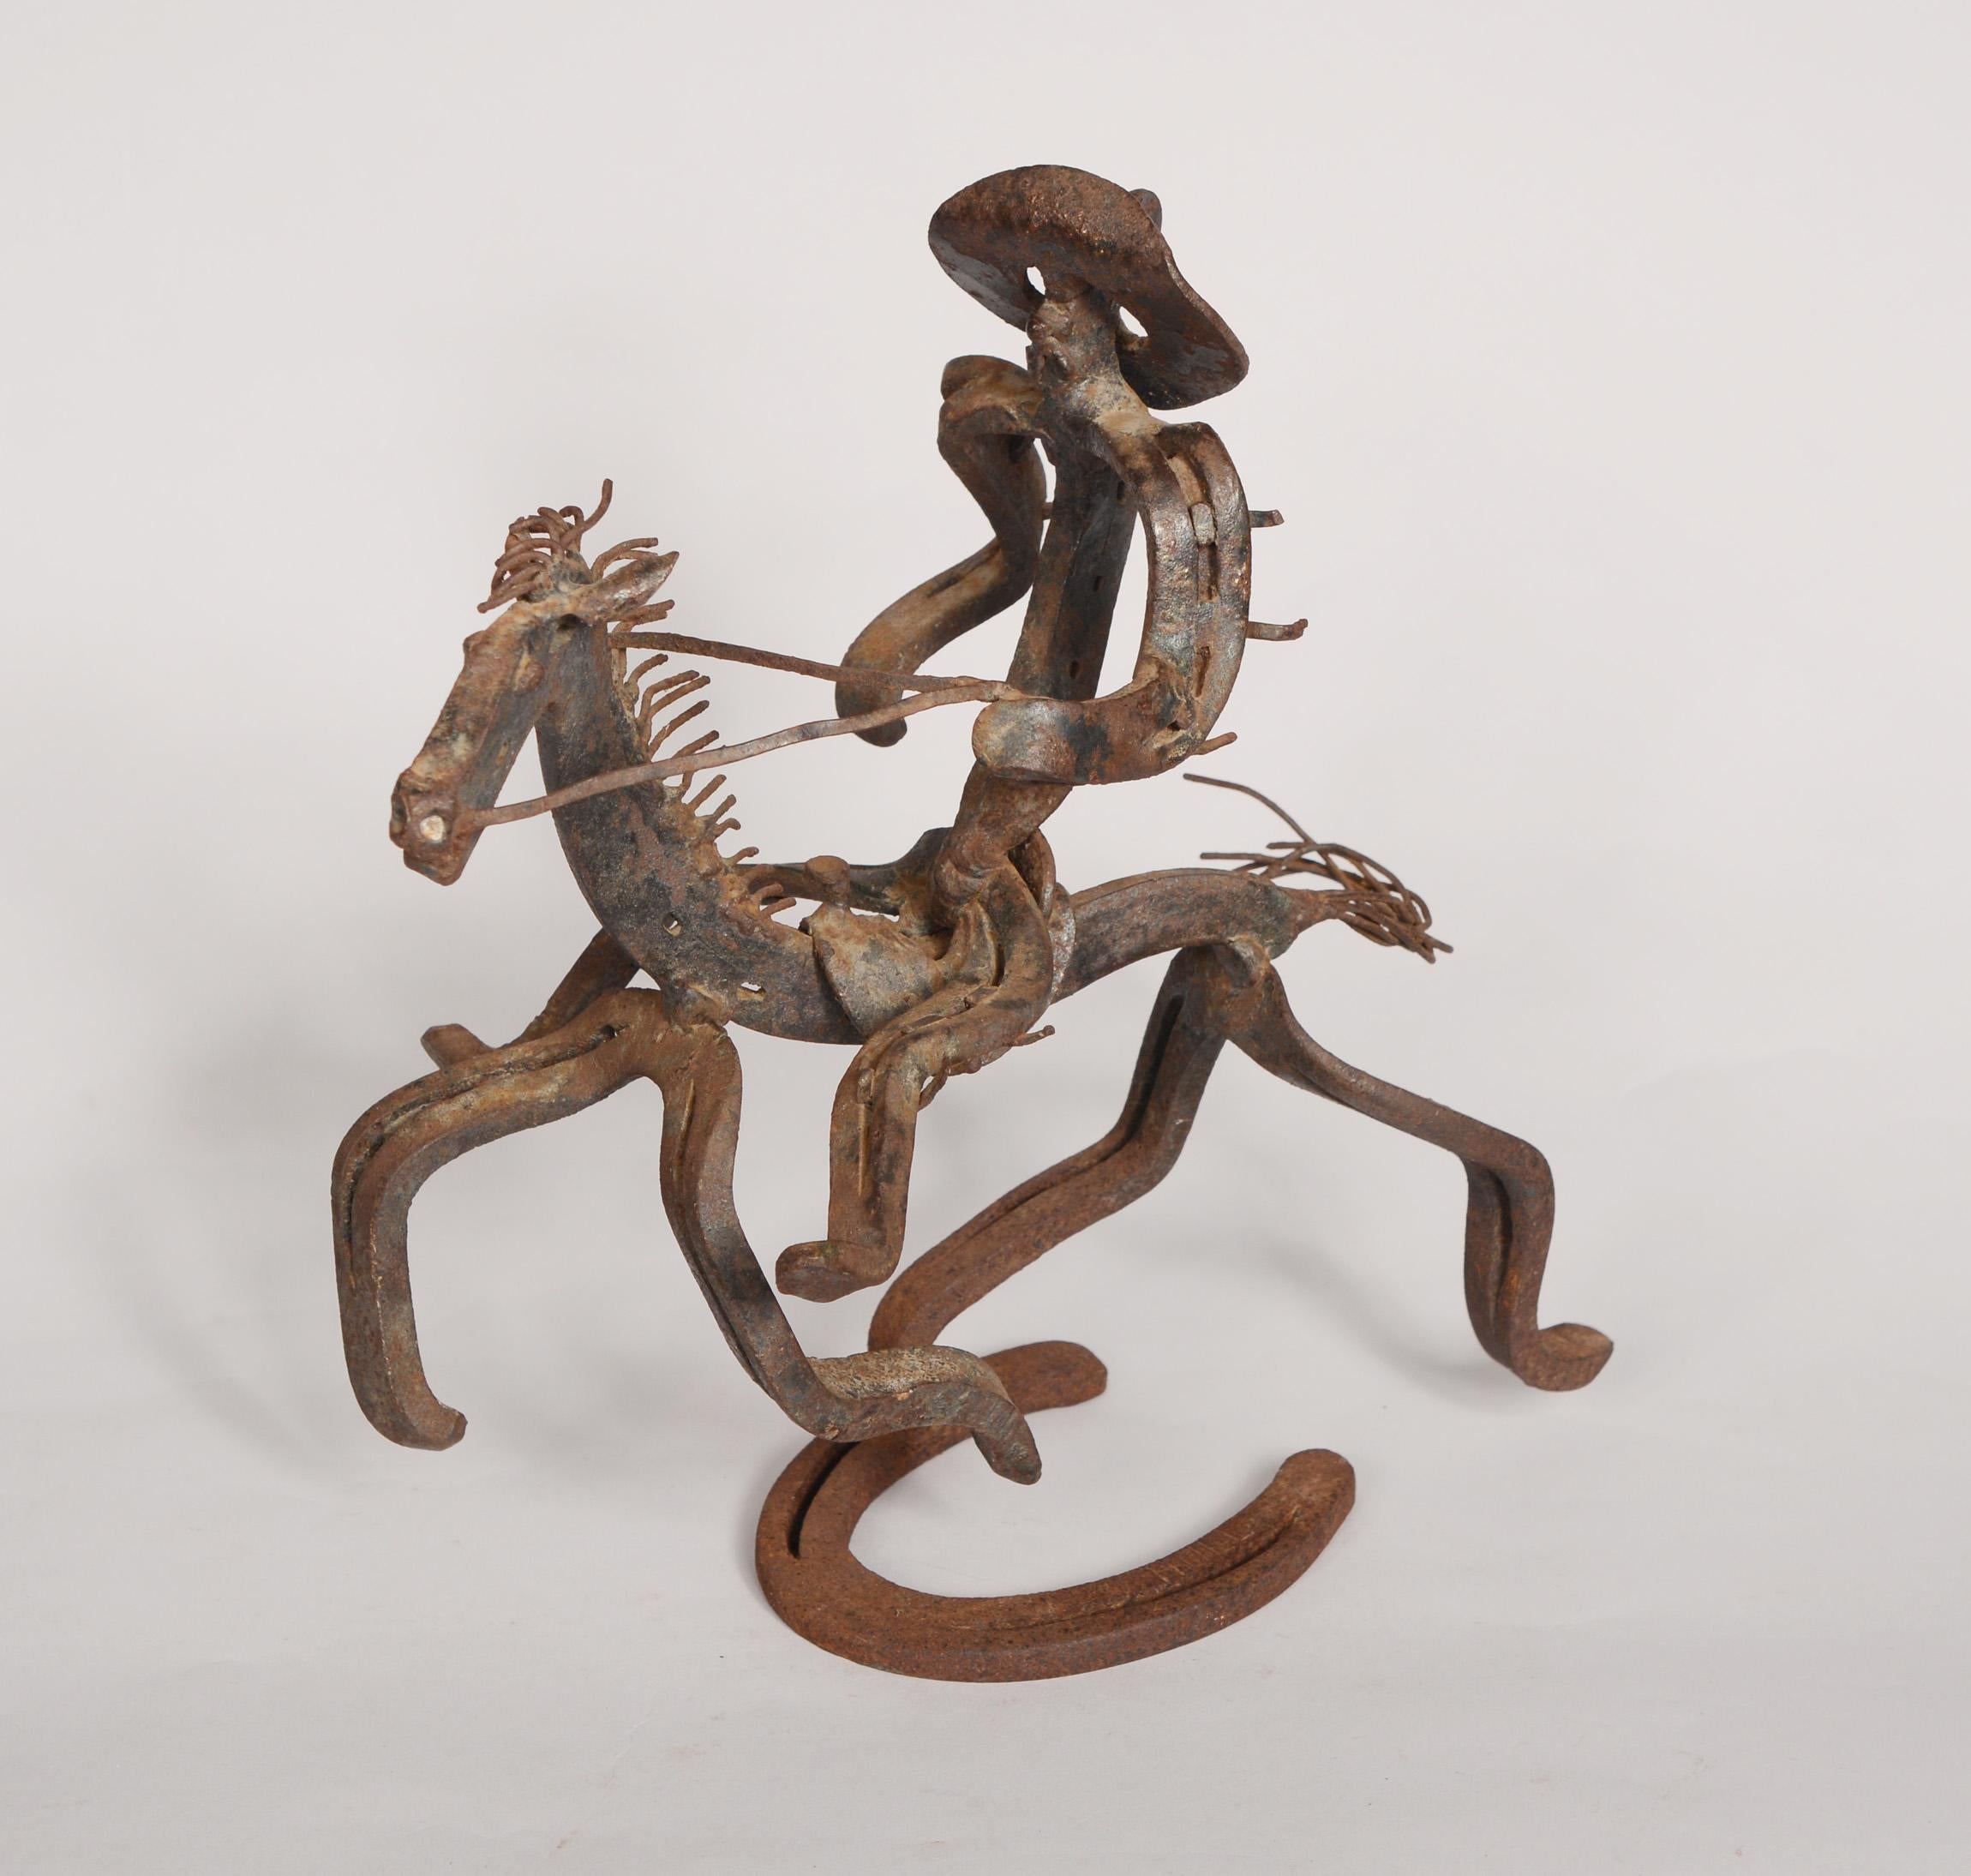 Folk art horseshoe sculpture of a cowboy on horseback. This sculpture uses blacksmith techniques with twisting and bending of the horseshoes making it very animated in appearance. The base is signed Hull.